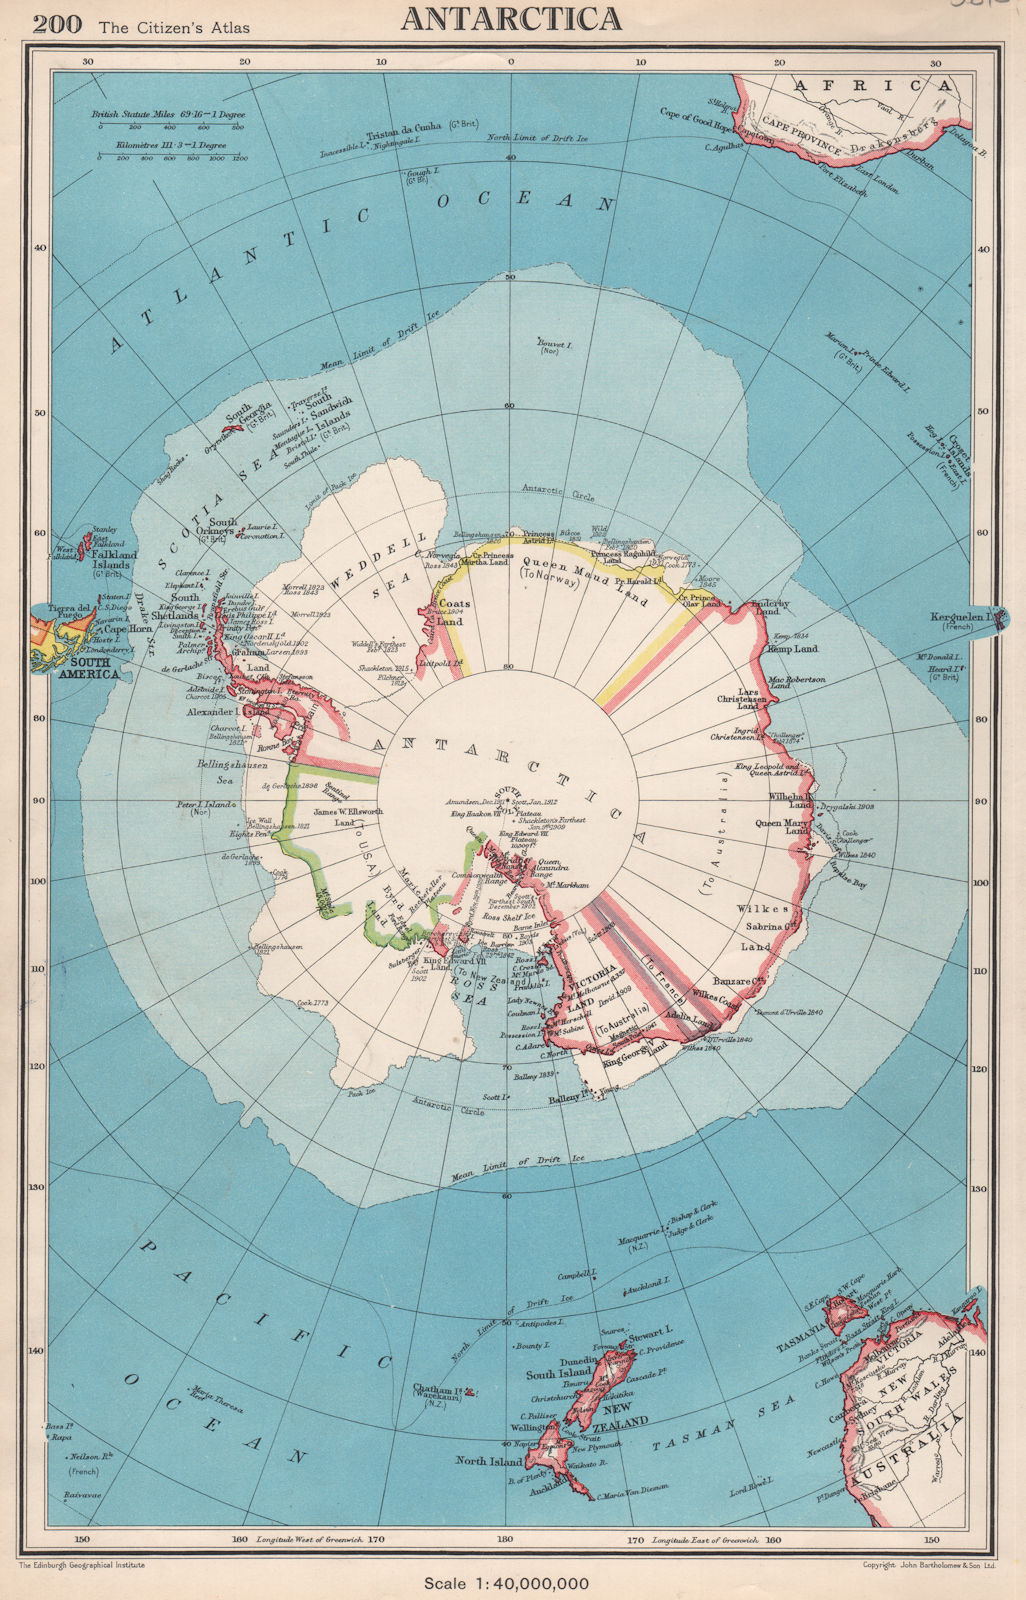 ANTARCTICA.showing claims.Marie Byrd Land Queen Maud Land.BARTHOLOMEW 1952 map